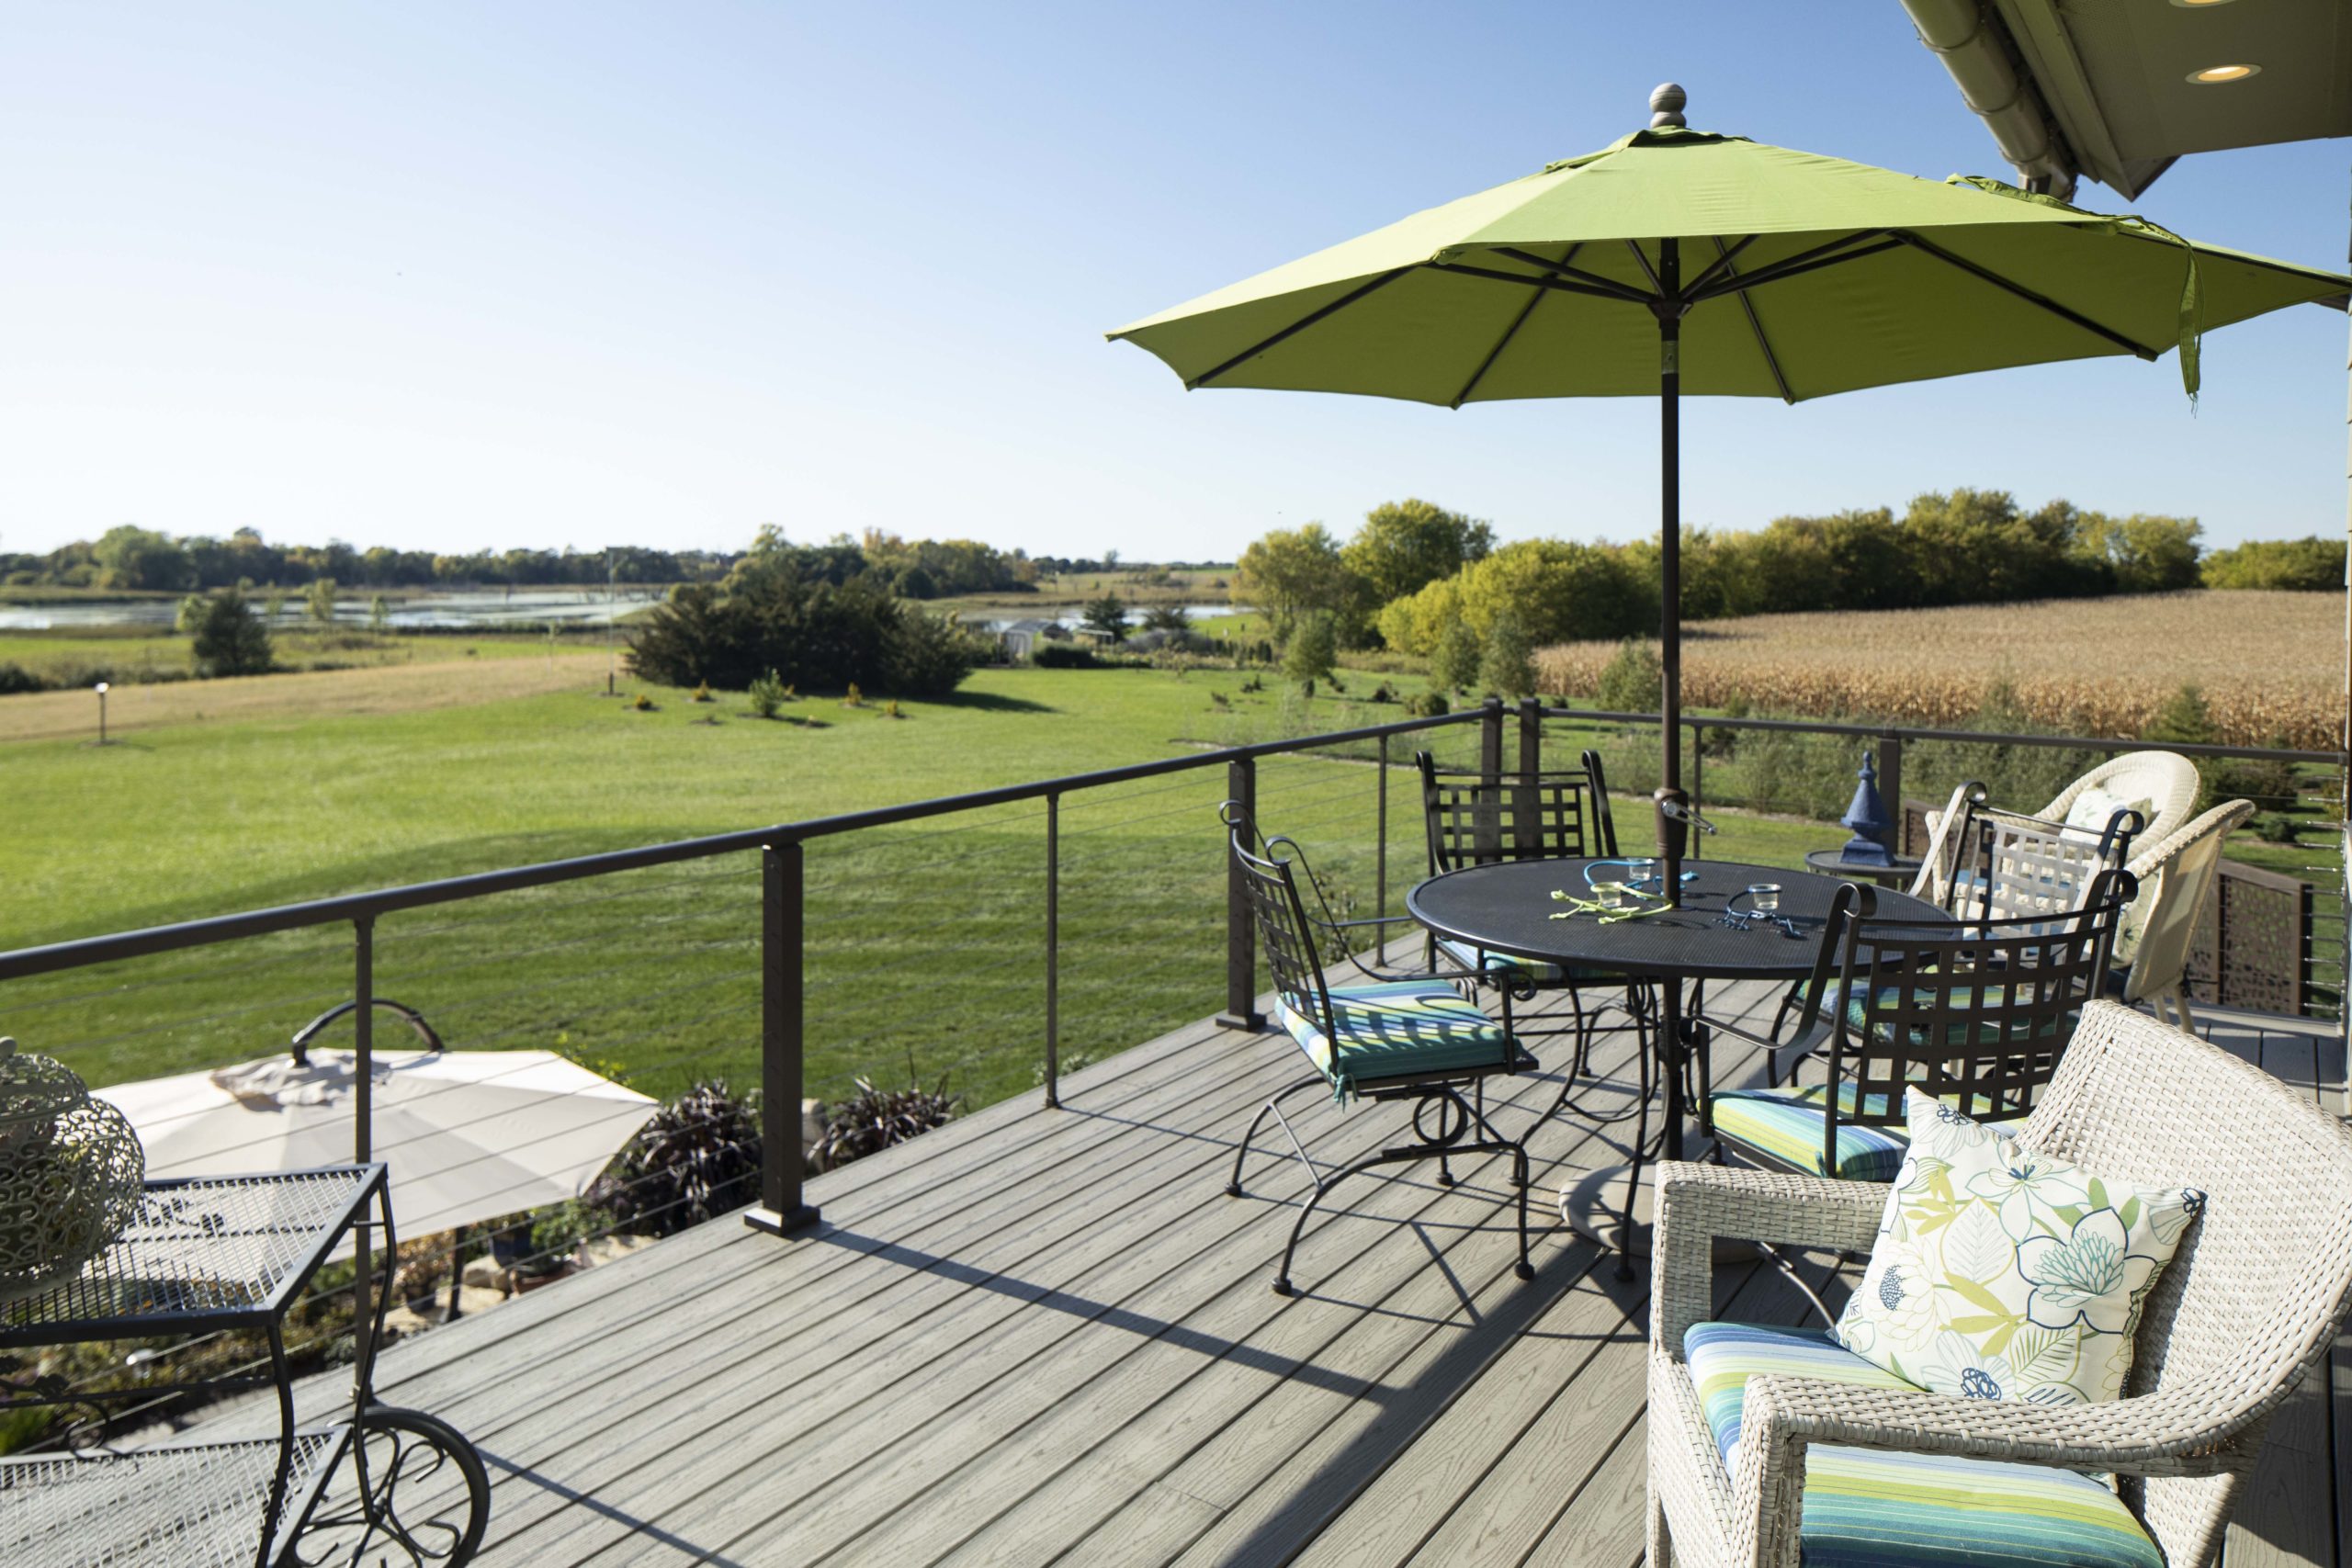 A prairie-style deck with a custom table and chairs, complete with an umbrella for shade.